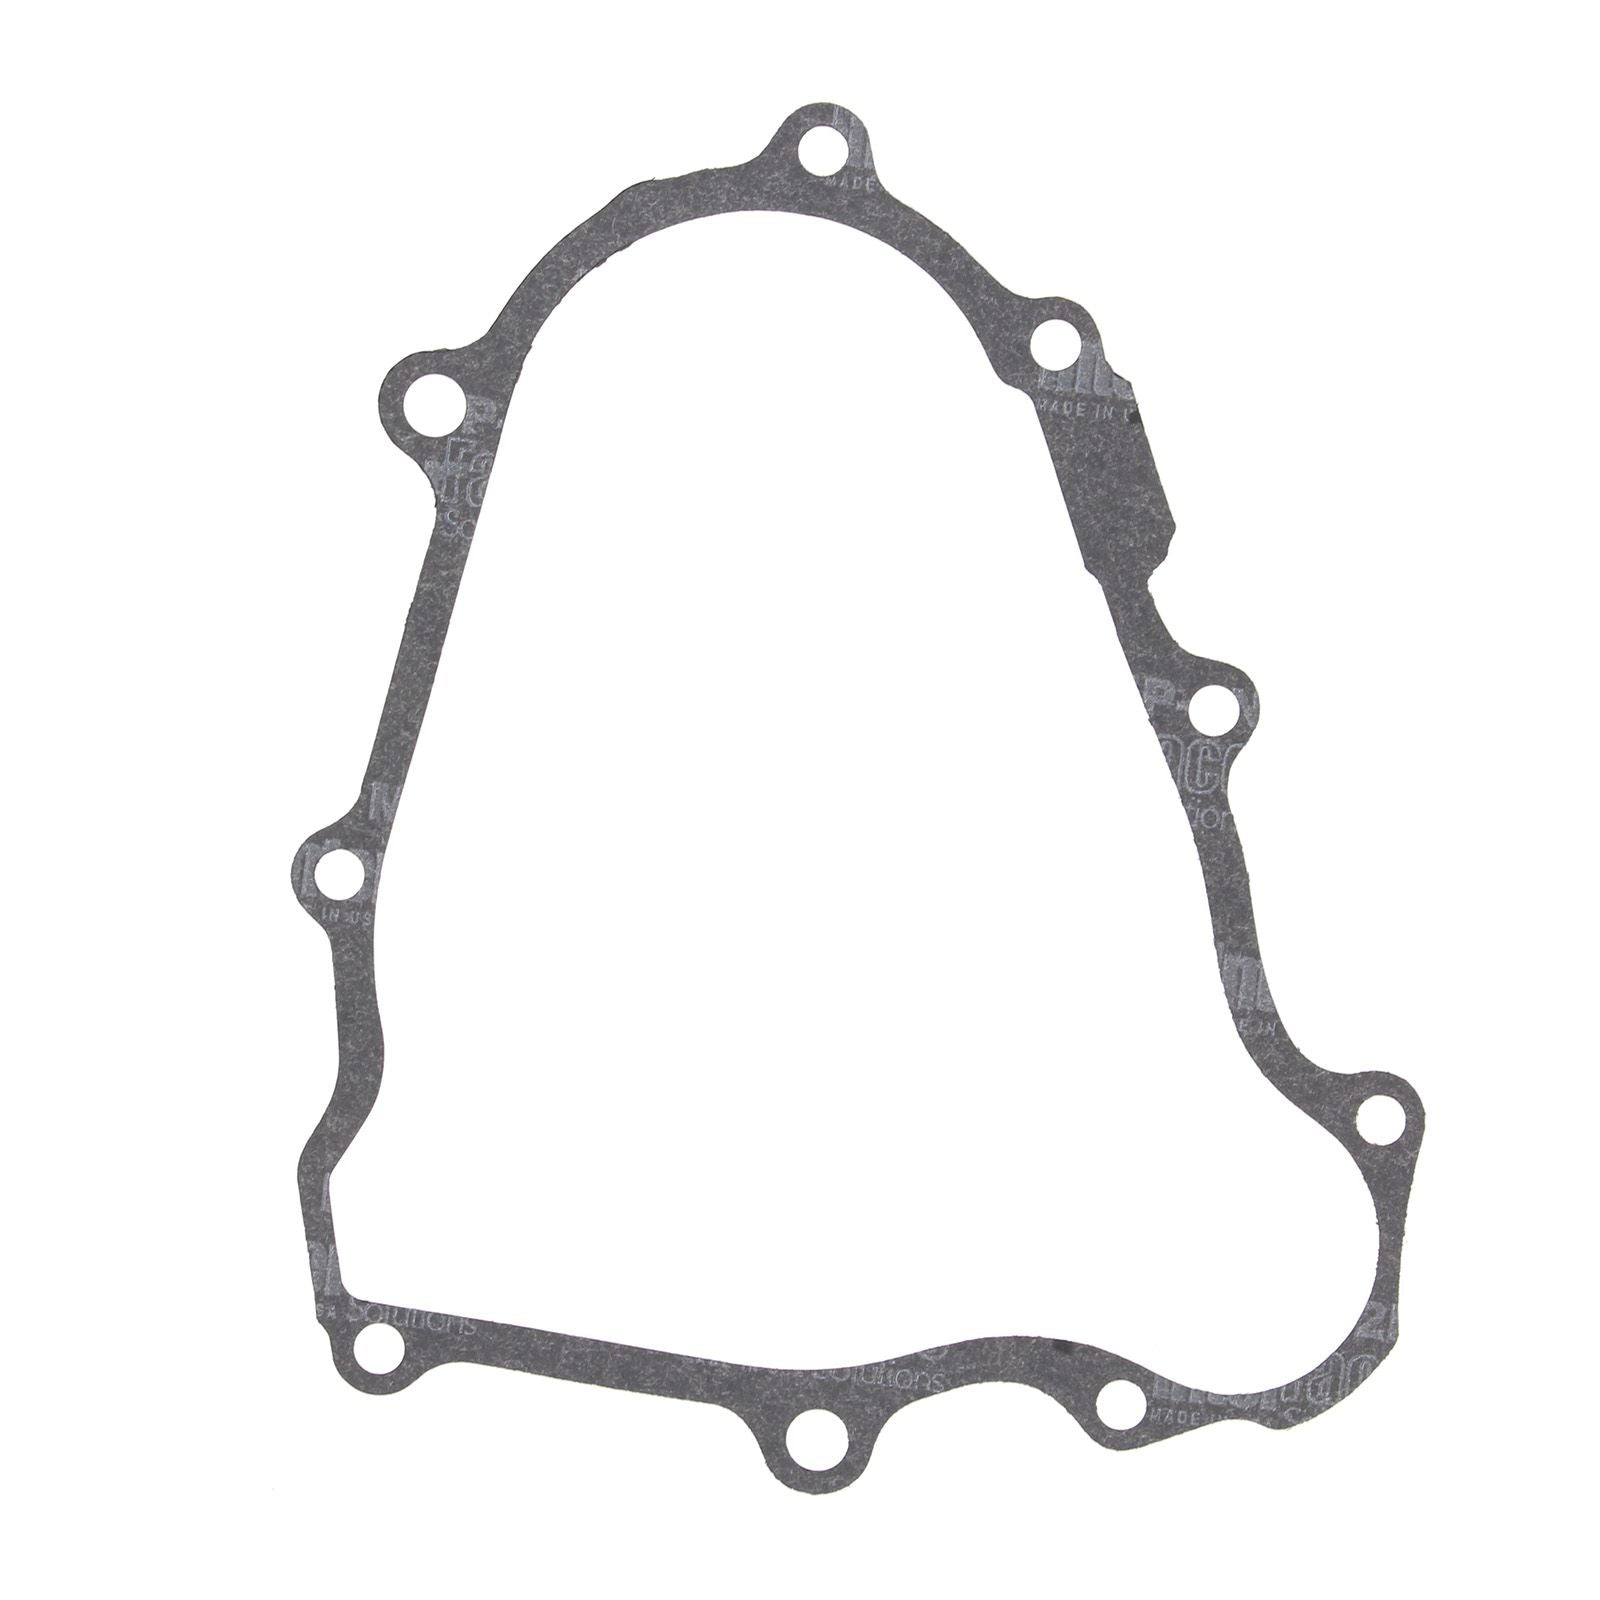 New VERTEX Ignition Cover Gasket For Yamaha #VER816661